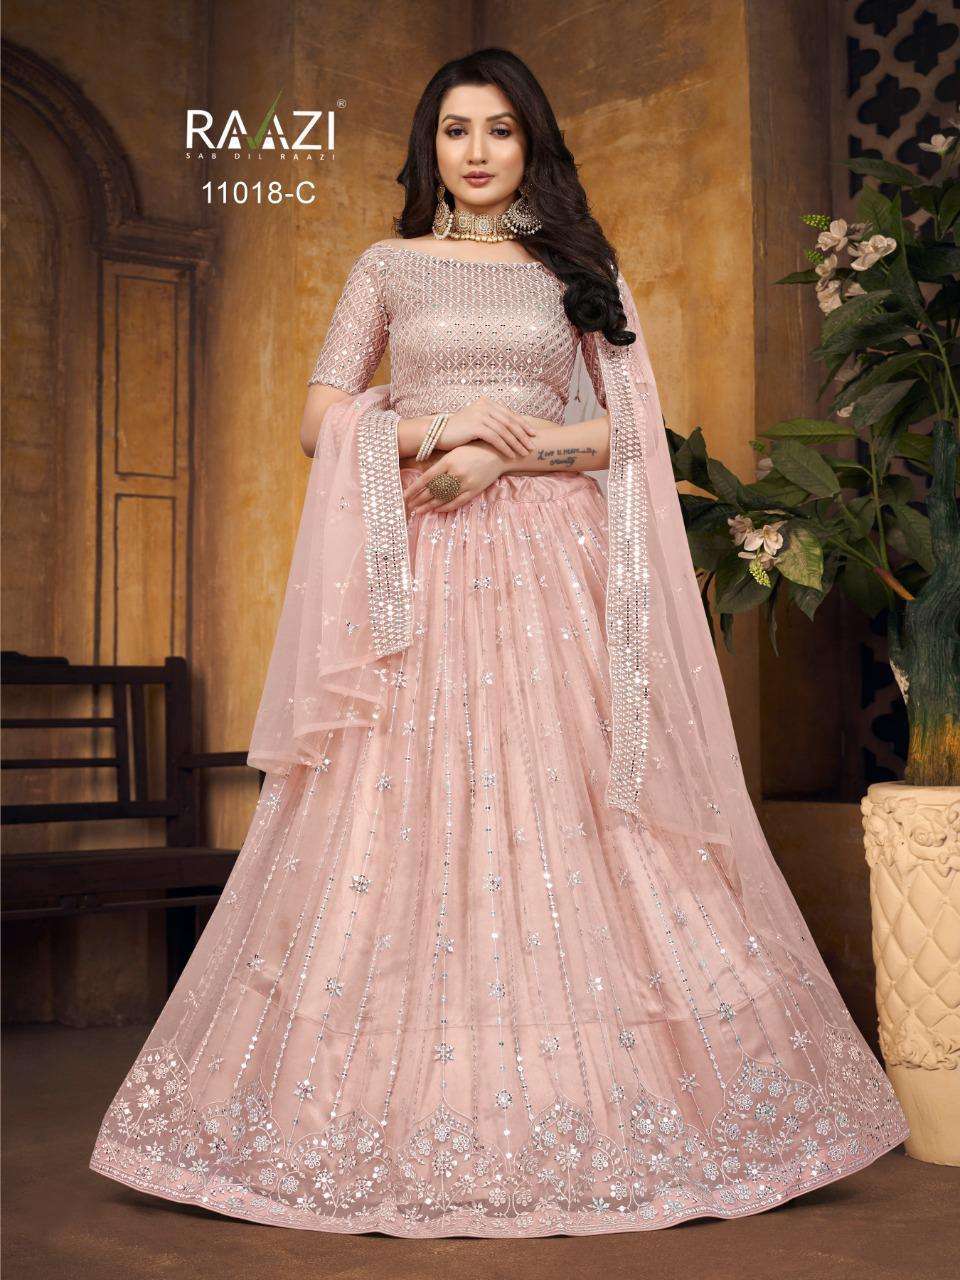 New Heavy Designer Semi-Stitched Bridal Lehenga at Rs 5550 in Surat-tuongthan.vn